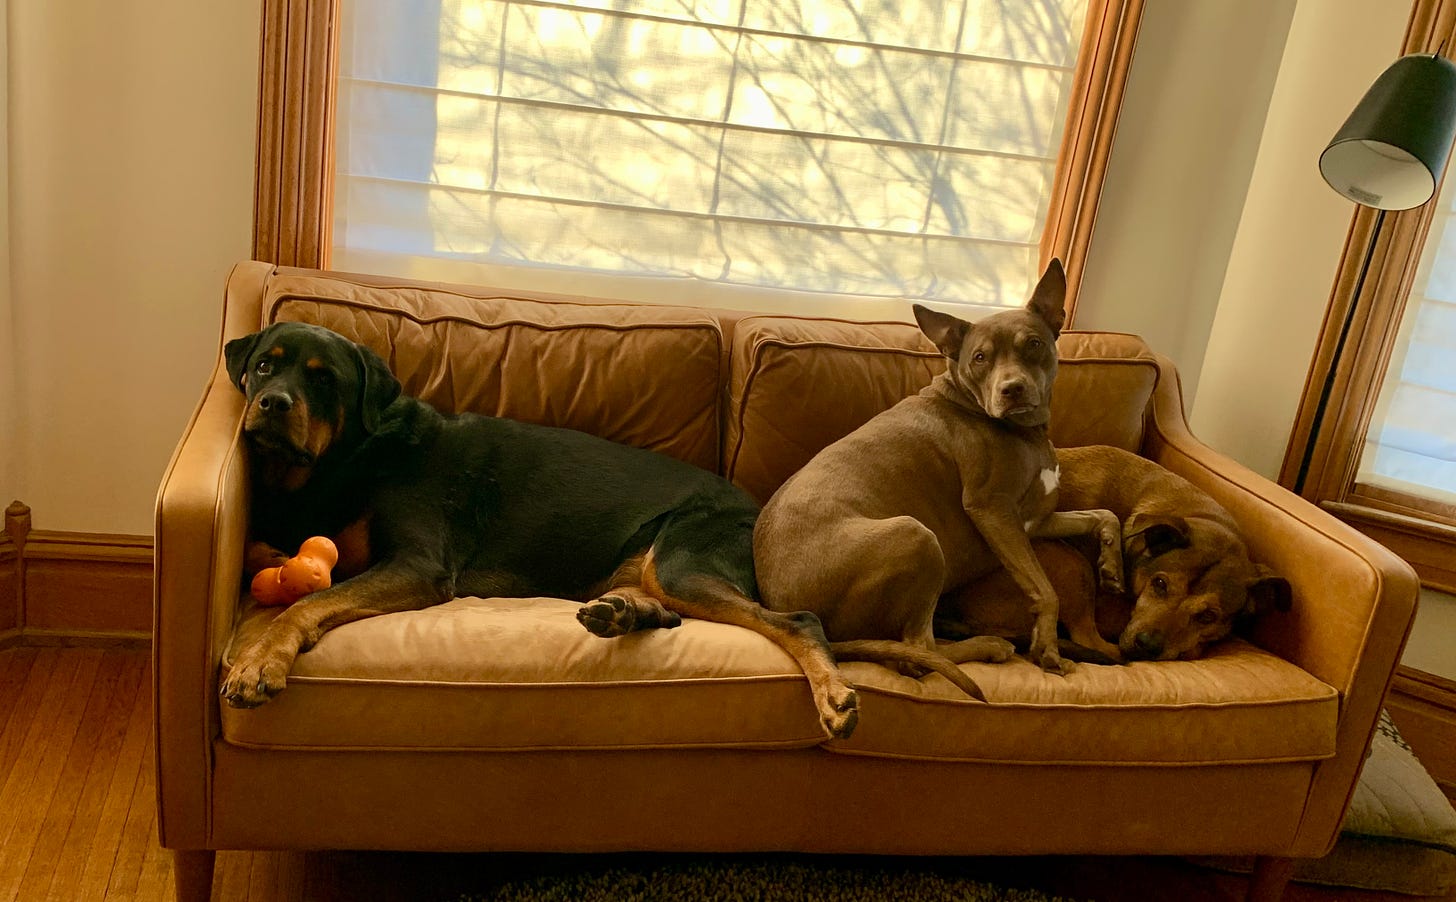 one black dog with orange toy and two caramel-colored dogs on a caramel-colored sofa with shadows of bare branches visible behind the white curtain